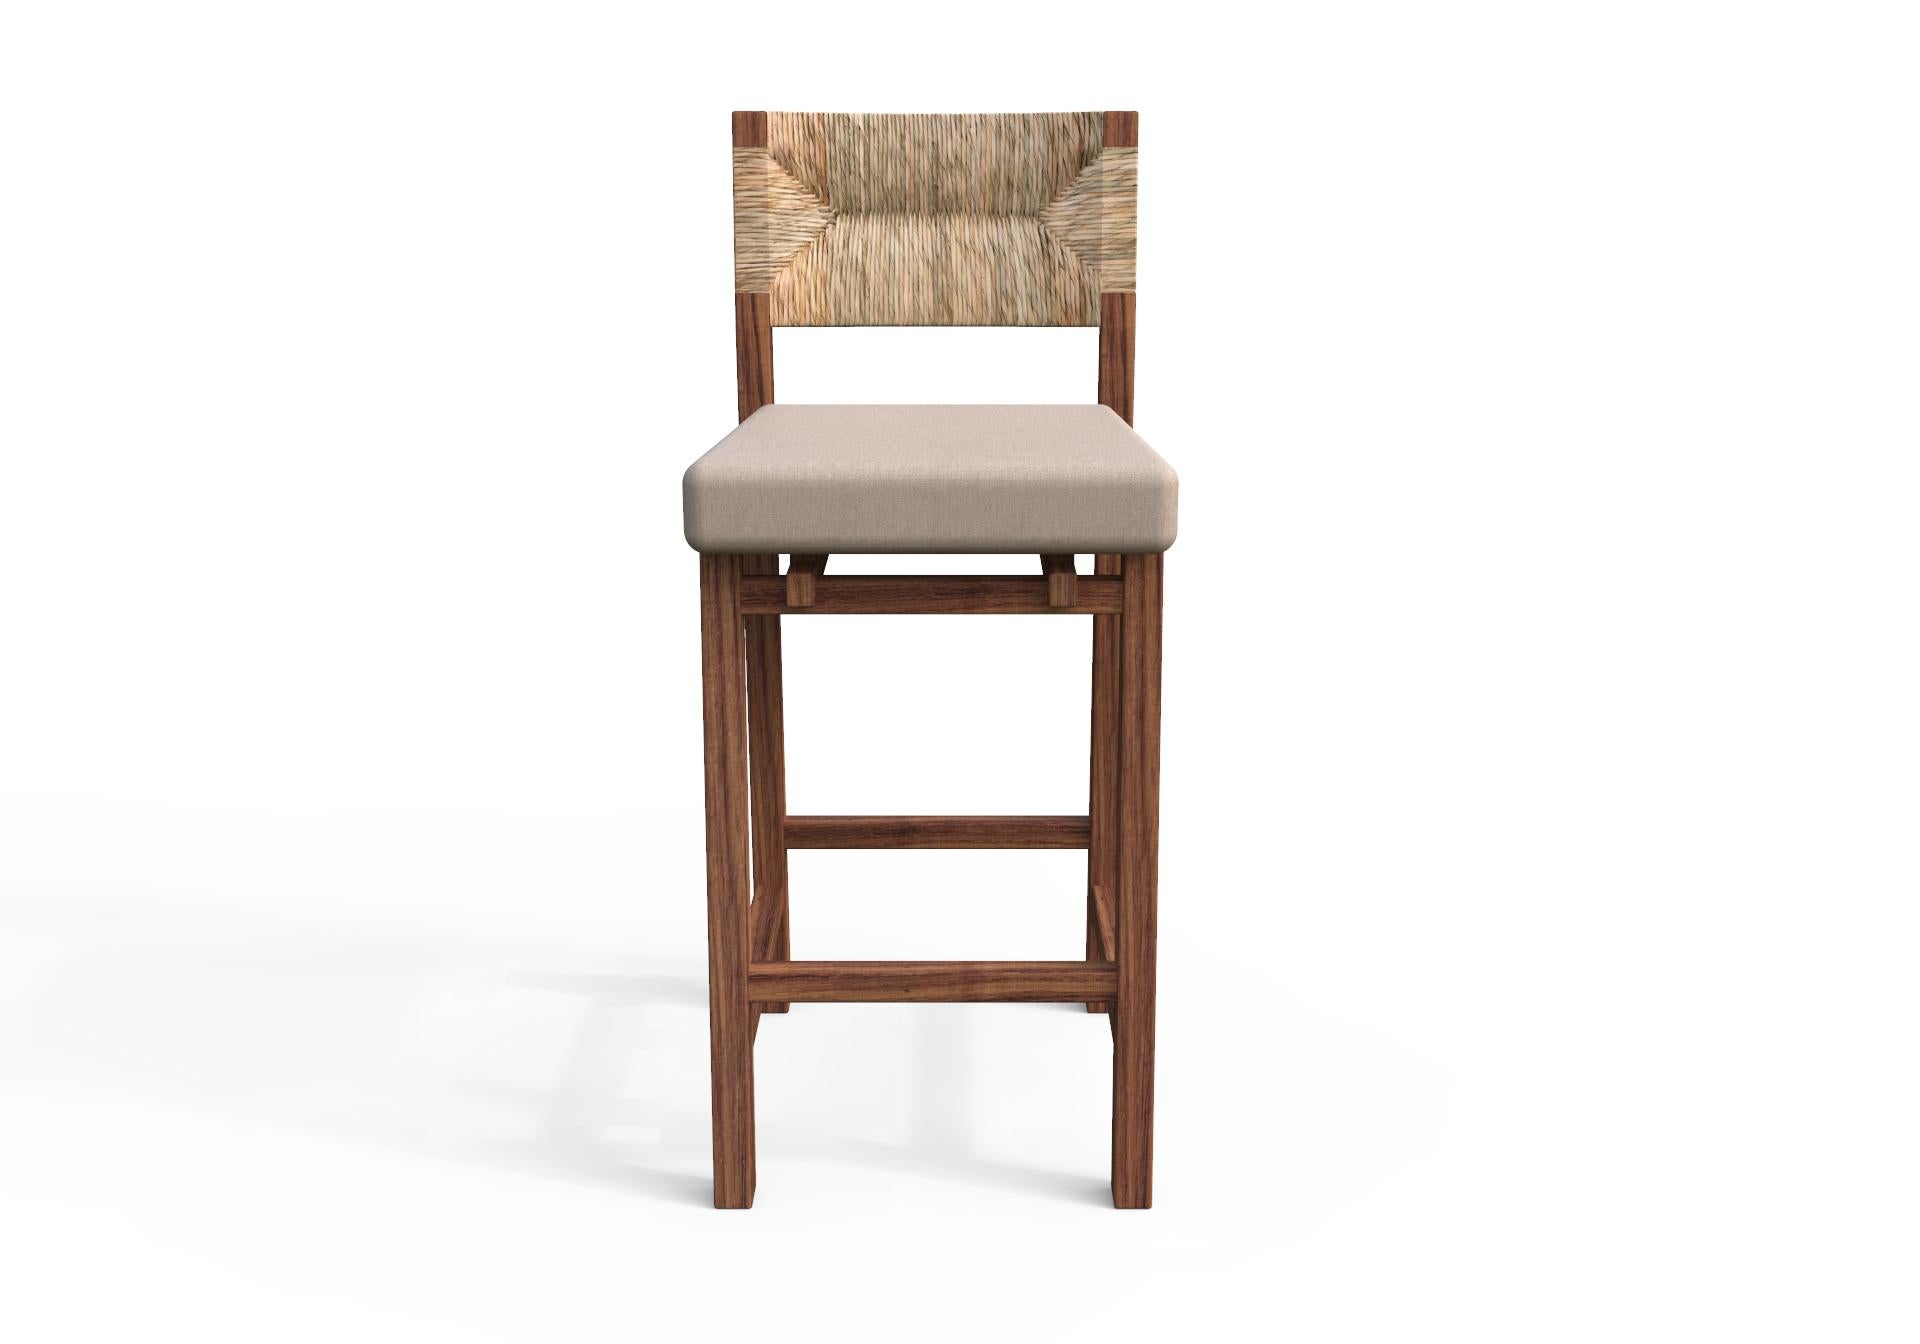 This classic design has a modern flourish without overshadowing the handcrafted details from the Natural Palm woven back that makes it so unique. The Lago counterstool is made of solid Huanacaxtle, a tropical hardwood from southern Mexico. The